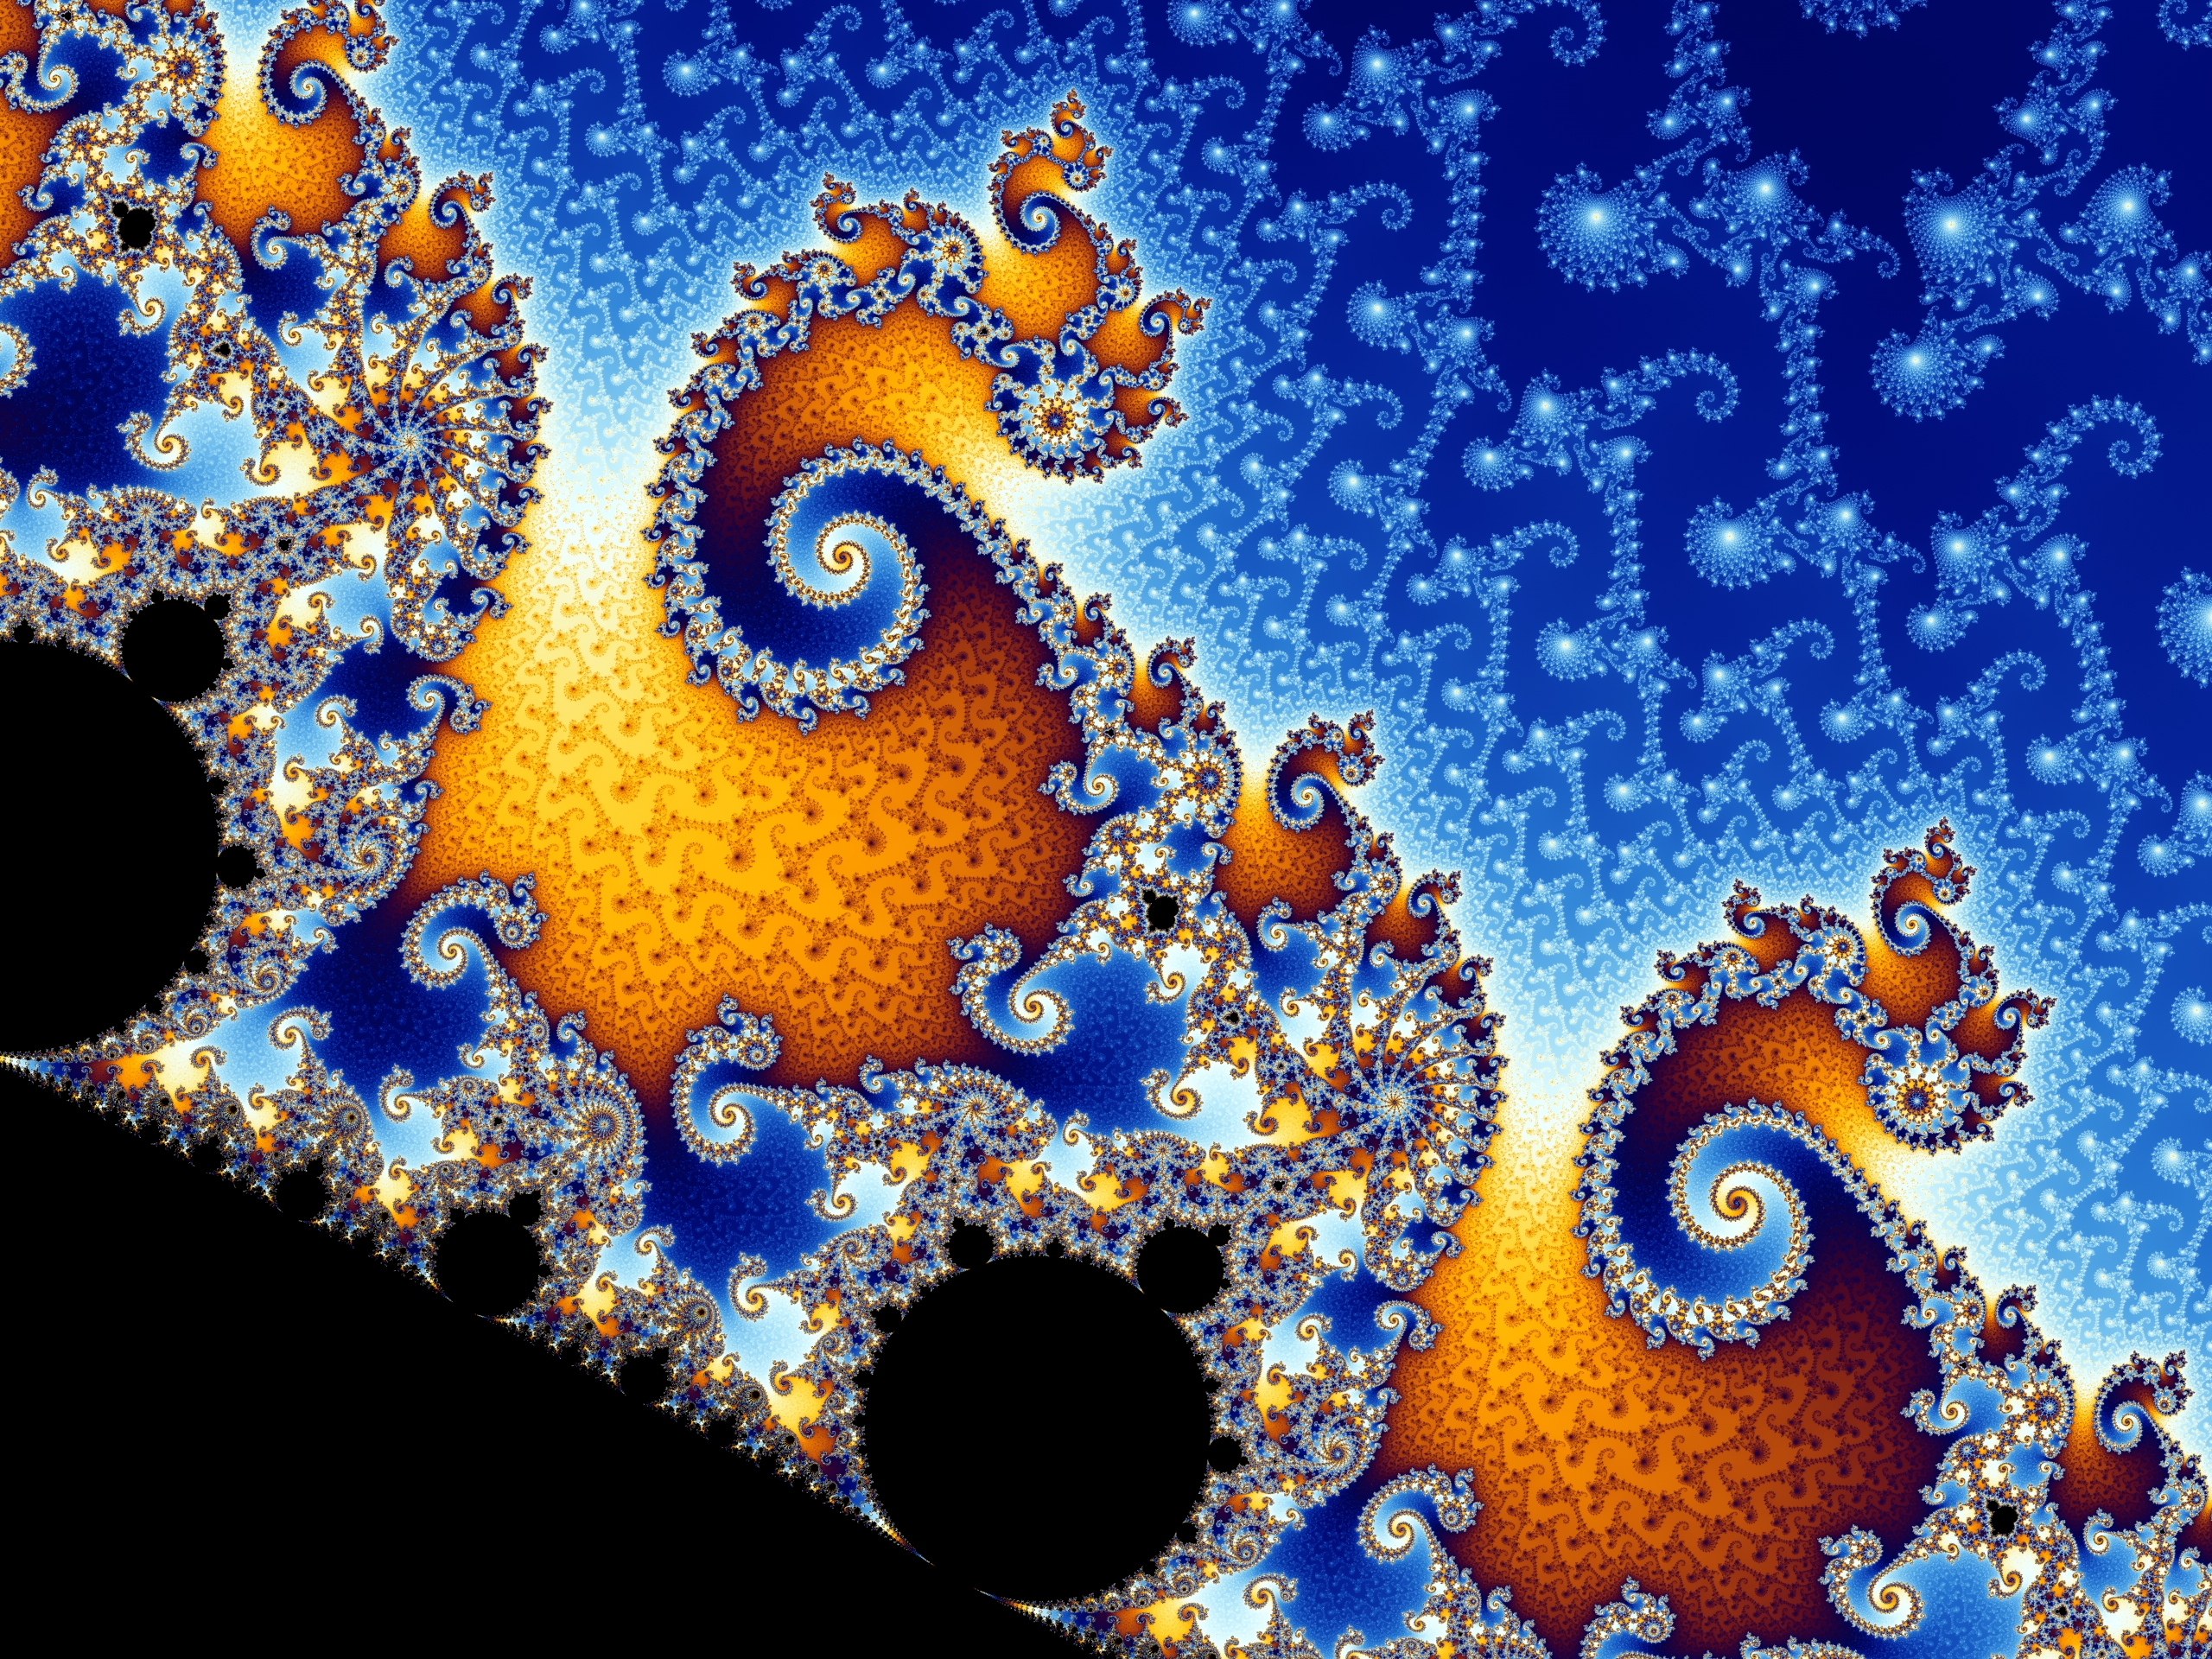 The Sky Is Now Filled With Additional Spirals Resembling Julia Sets